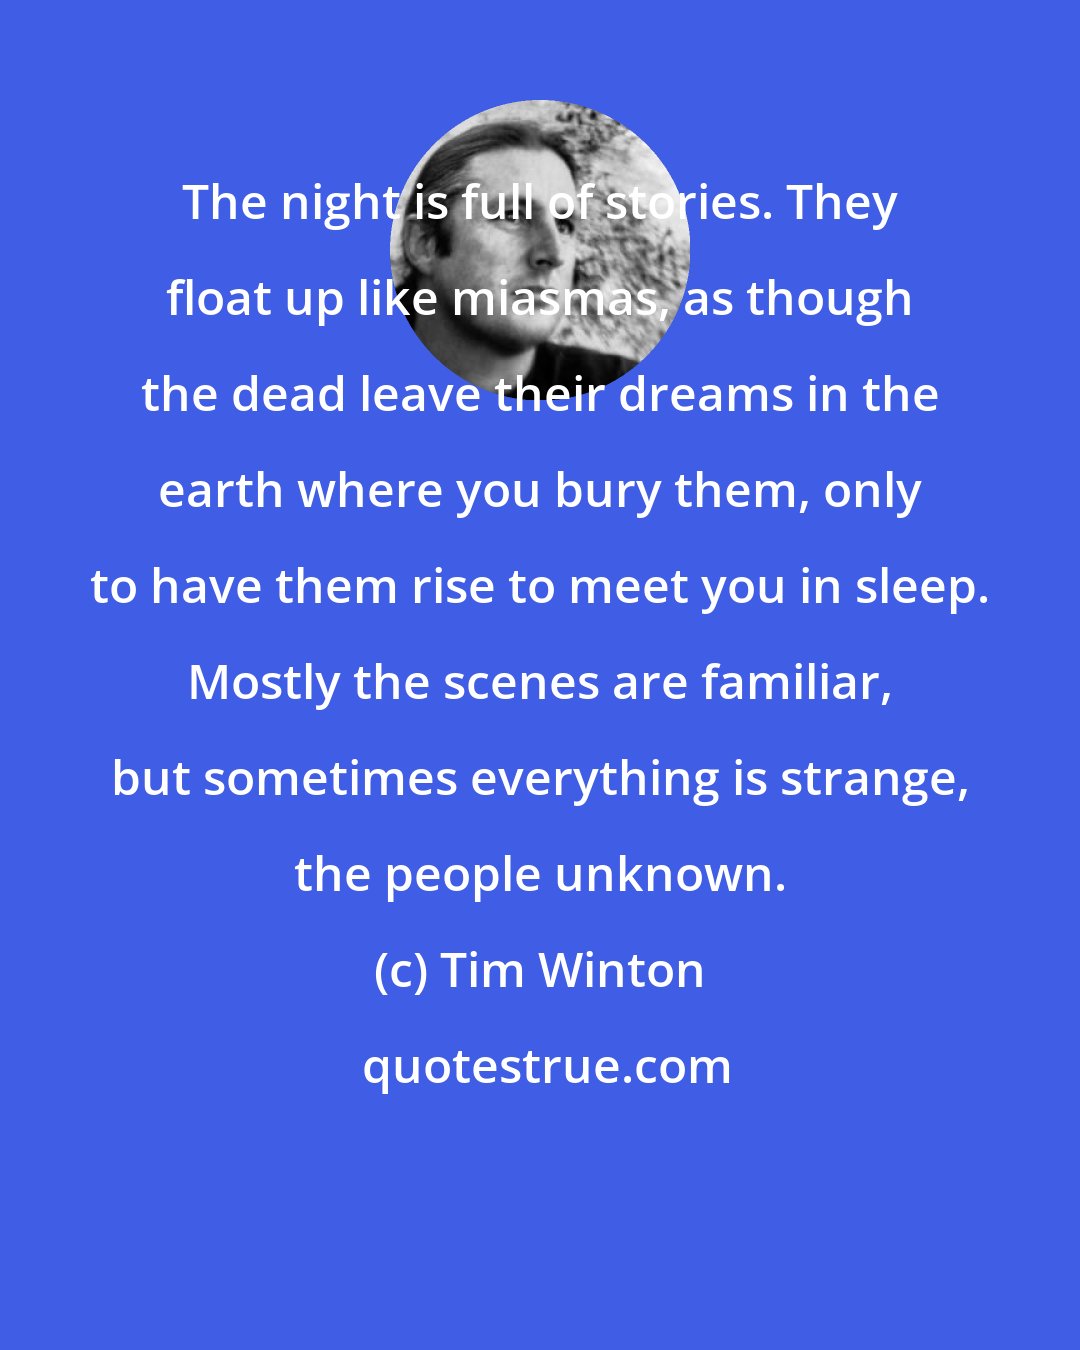 Tim Winton: The night is full of stories. They float up like miasmas, as though the dead leave their dreams in the earth where you bury them, only to have them rise to meet you in sleep. Mostly the scenes are familiar, but sometimes everything is strange, the people unknown.